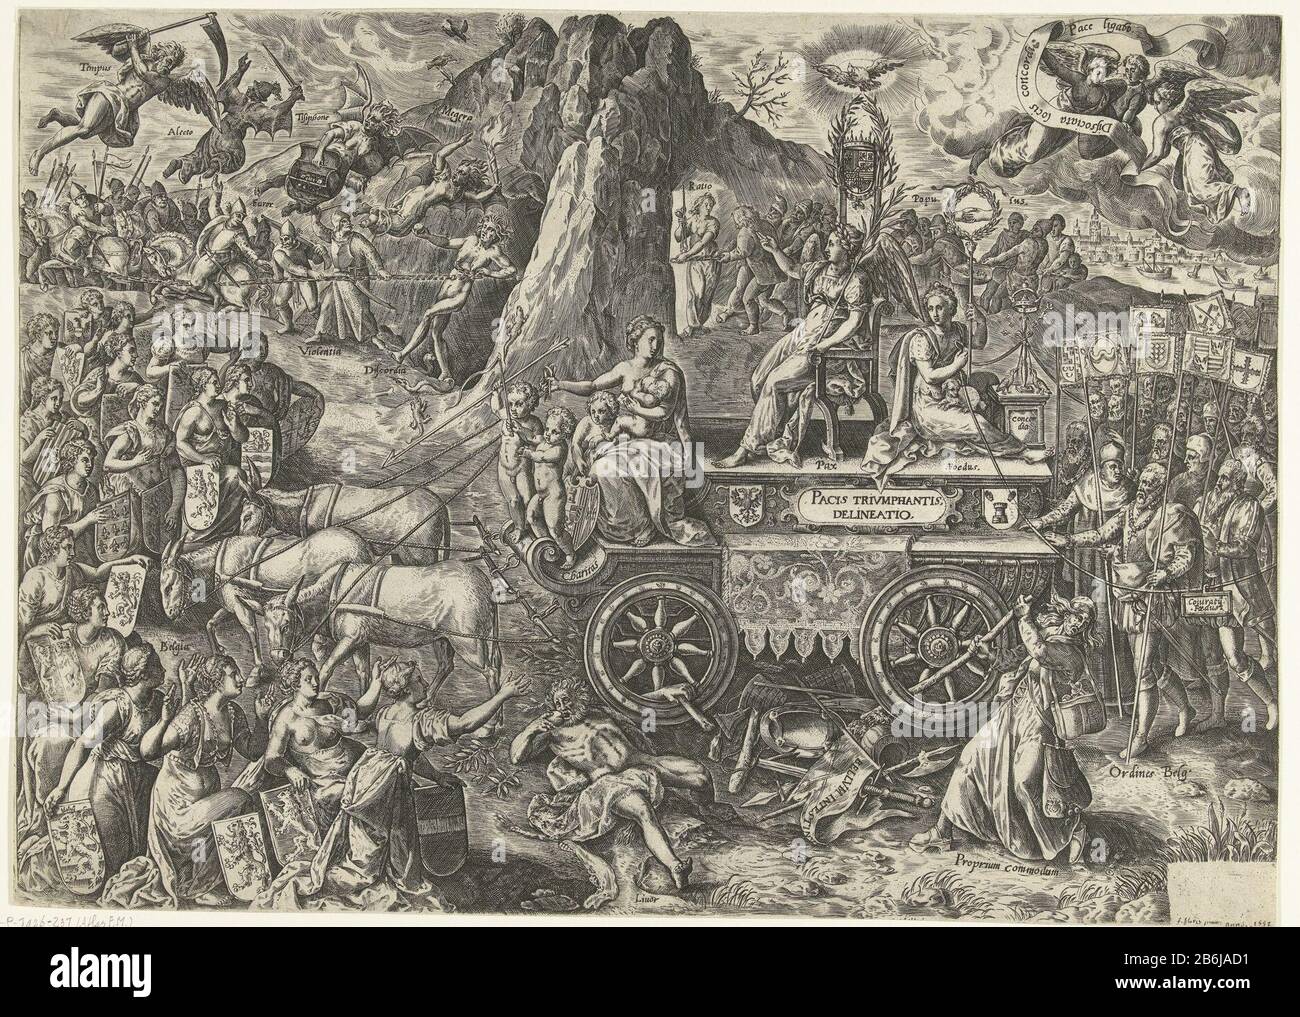 The triomfwagen van de vrede, 1577 Triumphant Peace project (titel op object) The chariot of peace, 1577Pacis triumphantis delineatio (title object) Property Type: print propaganda picture Item number: RP-P-1926-237Catalogusreferentie: FMH 723-BFMH 1272Atlas van Stolk 605-bMauquoy-Hendricx (Who: rix) 1650Hollstein Dutch 1934-2 (2) Description: Allegory concluded peace with the Edict of 1577. the chariot of peace, drawn by three donkeys. The car sitting female personifications of Love (Charity), Peace (Pax) and Covenant (Foedus) and weapons of Philip II, Don Juan of Austria and Antwerp. Left kn Stock Photo